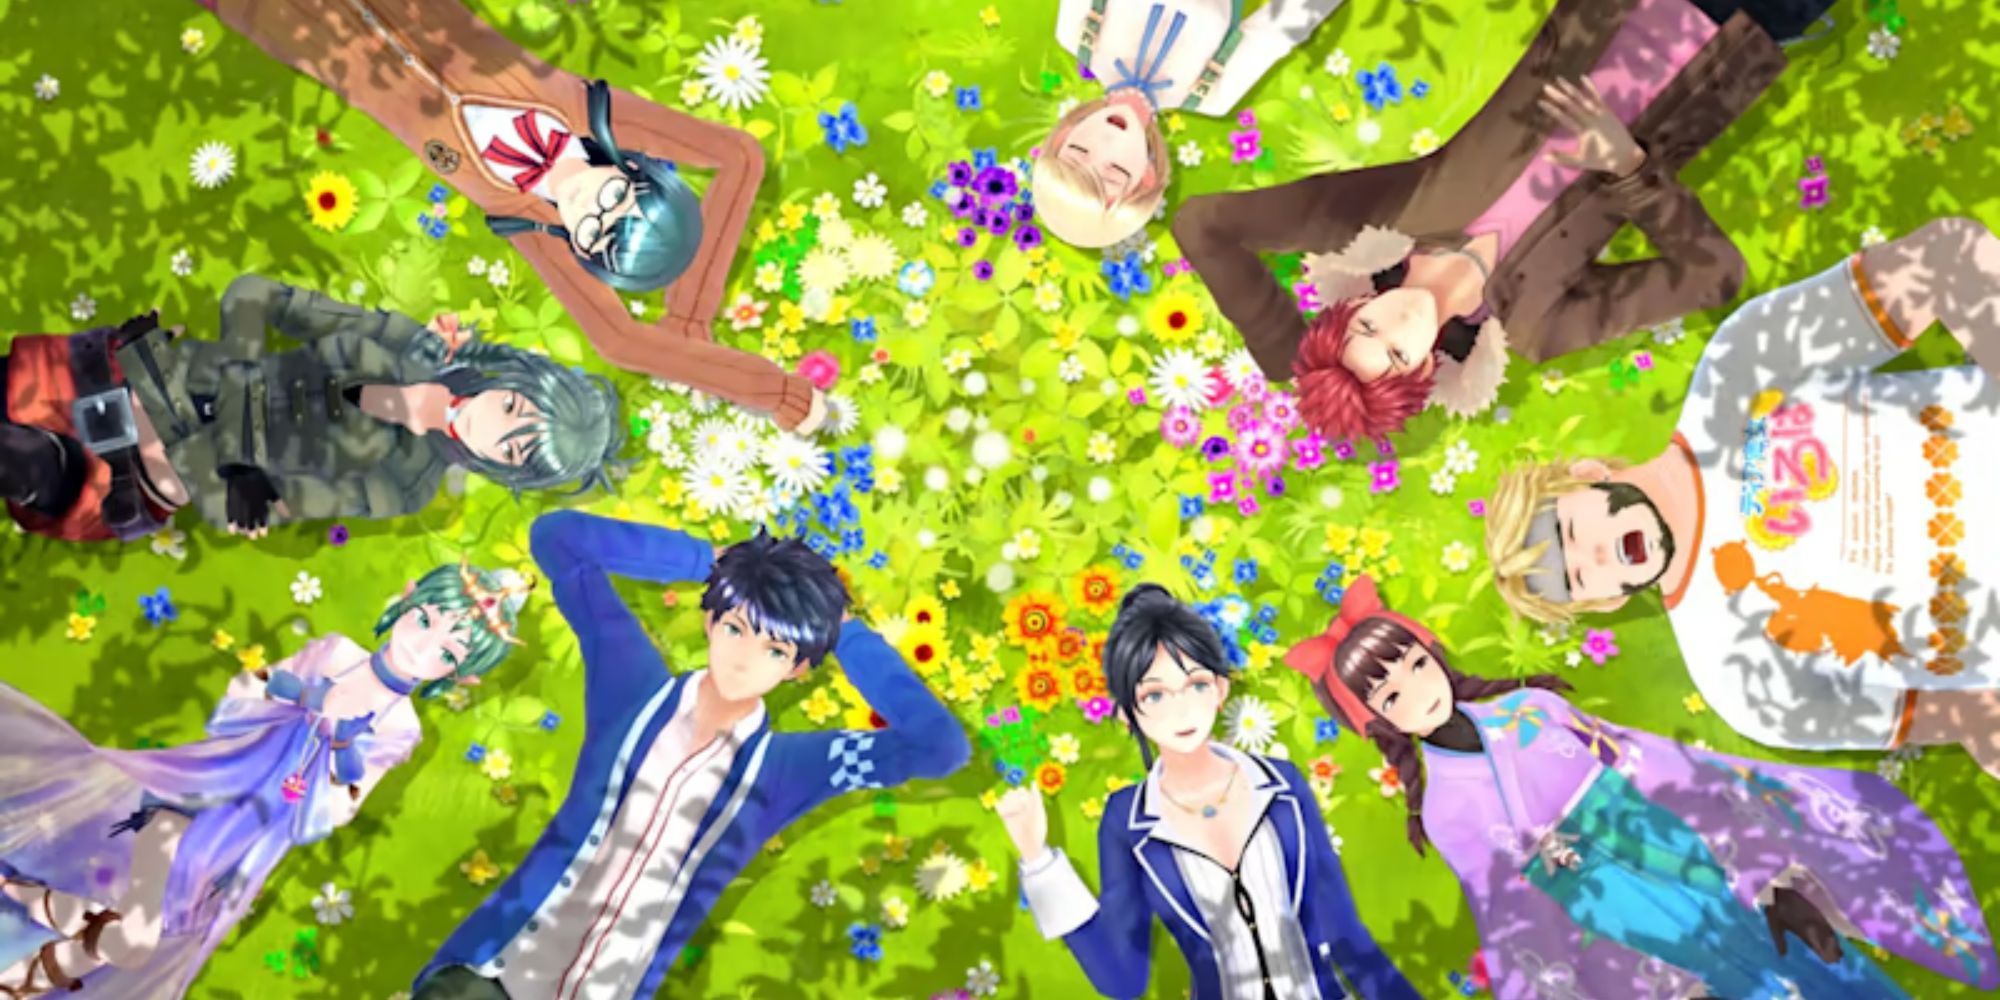 The main cast of Tokyo Mirage Sessions lay in a field of flowers